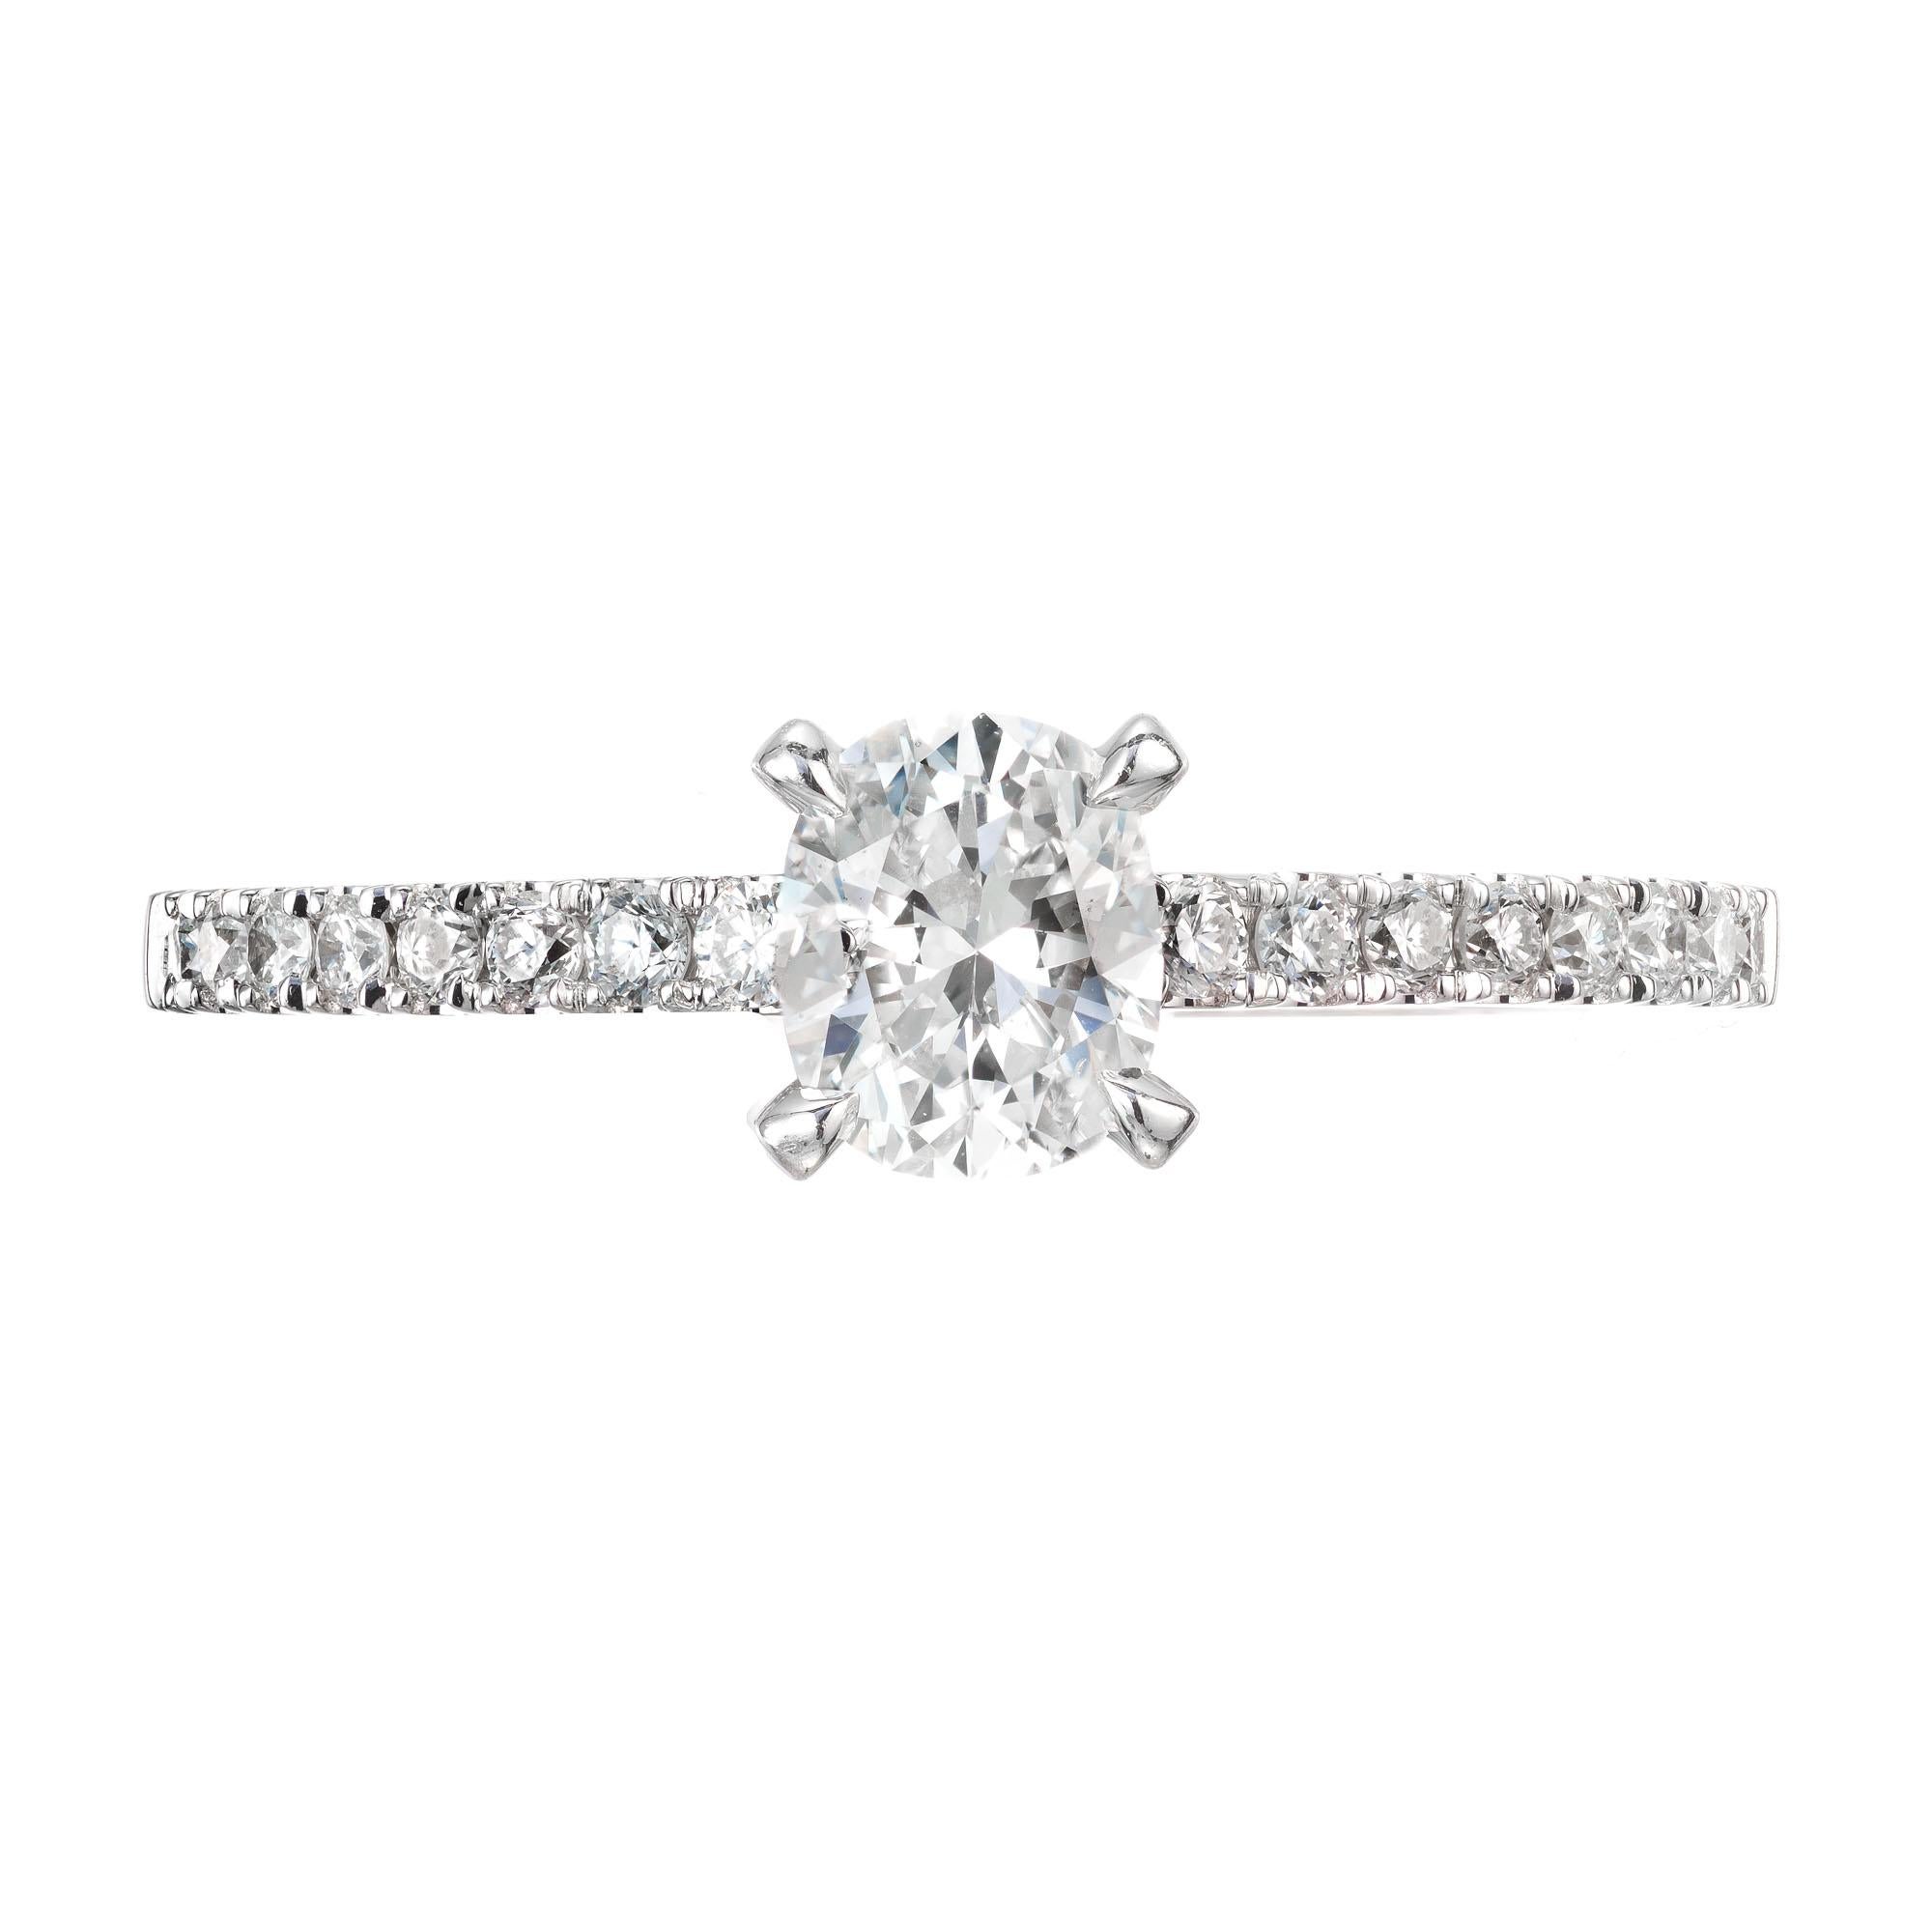 Sylvie Oval diamond engagement ring. 14k white gold setting with 16 round accent diamonds.  EGL certified. 

1 oval diamond, approx. total weight .55cts, G to H, SI1, 5.58 x 4.53 x 3.10mm, EGL certificate # US67012003D
16 full cut round diamonds,